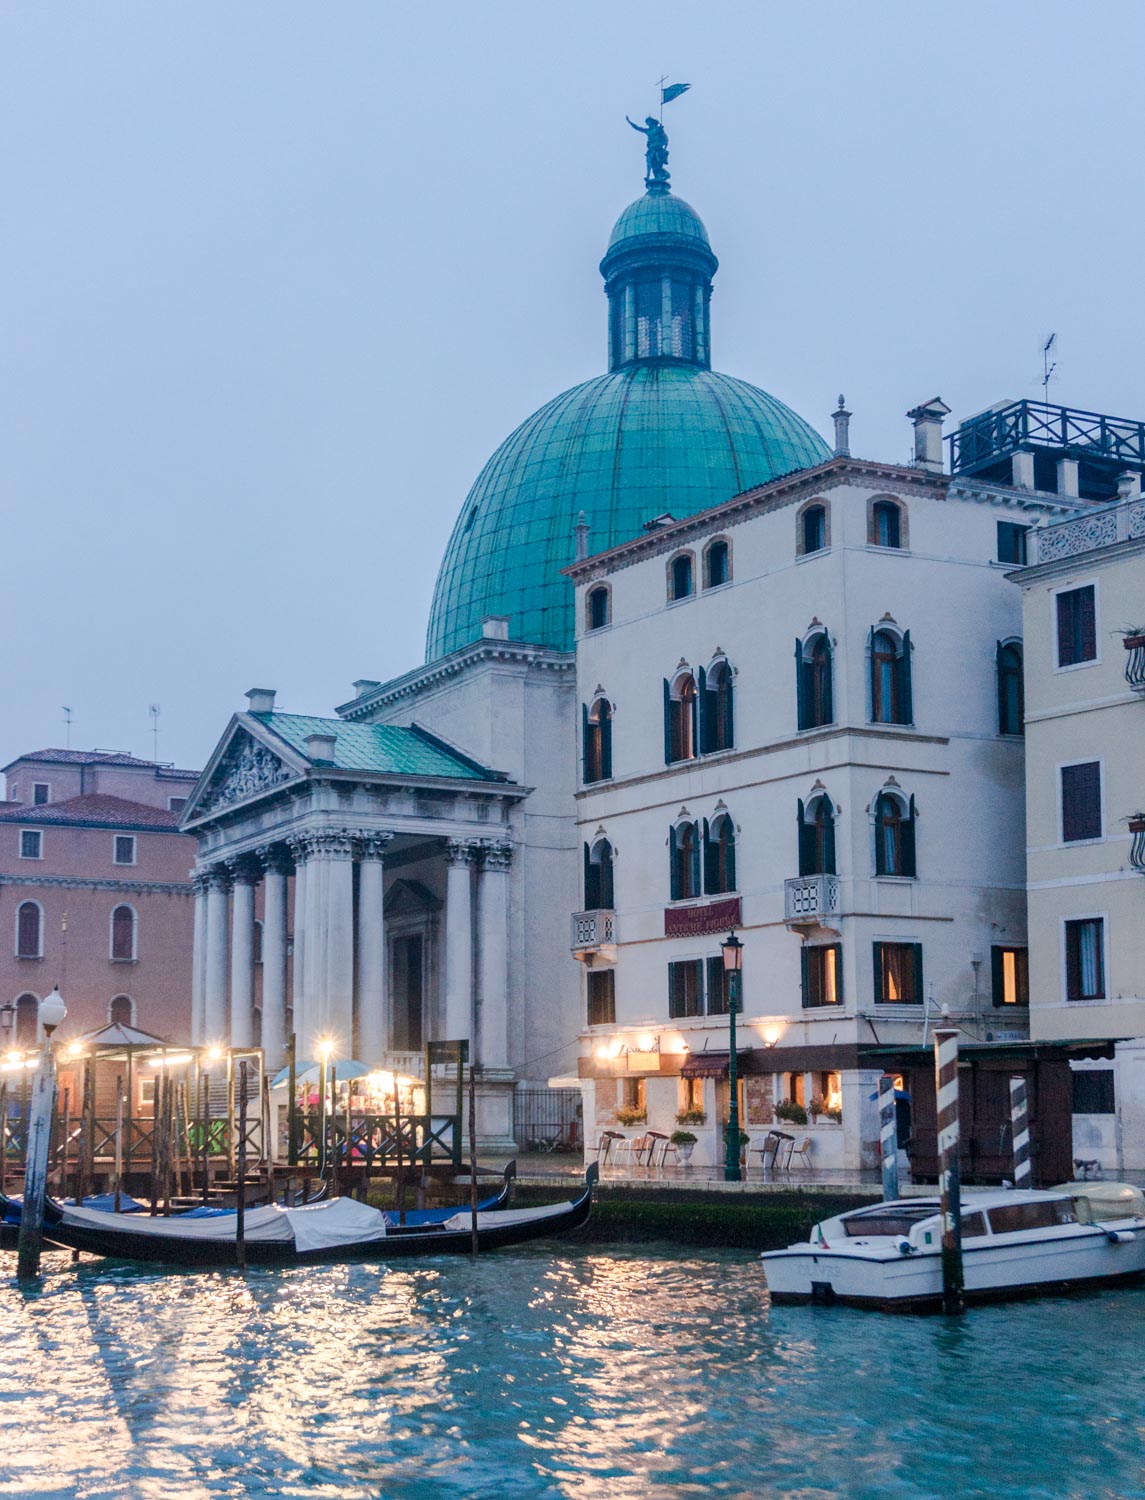 Saturday in Venice – Churches and evening falling